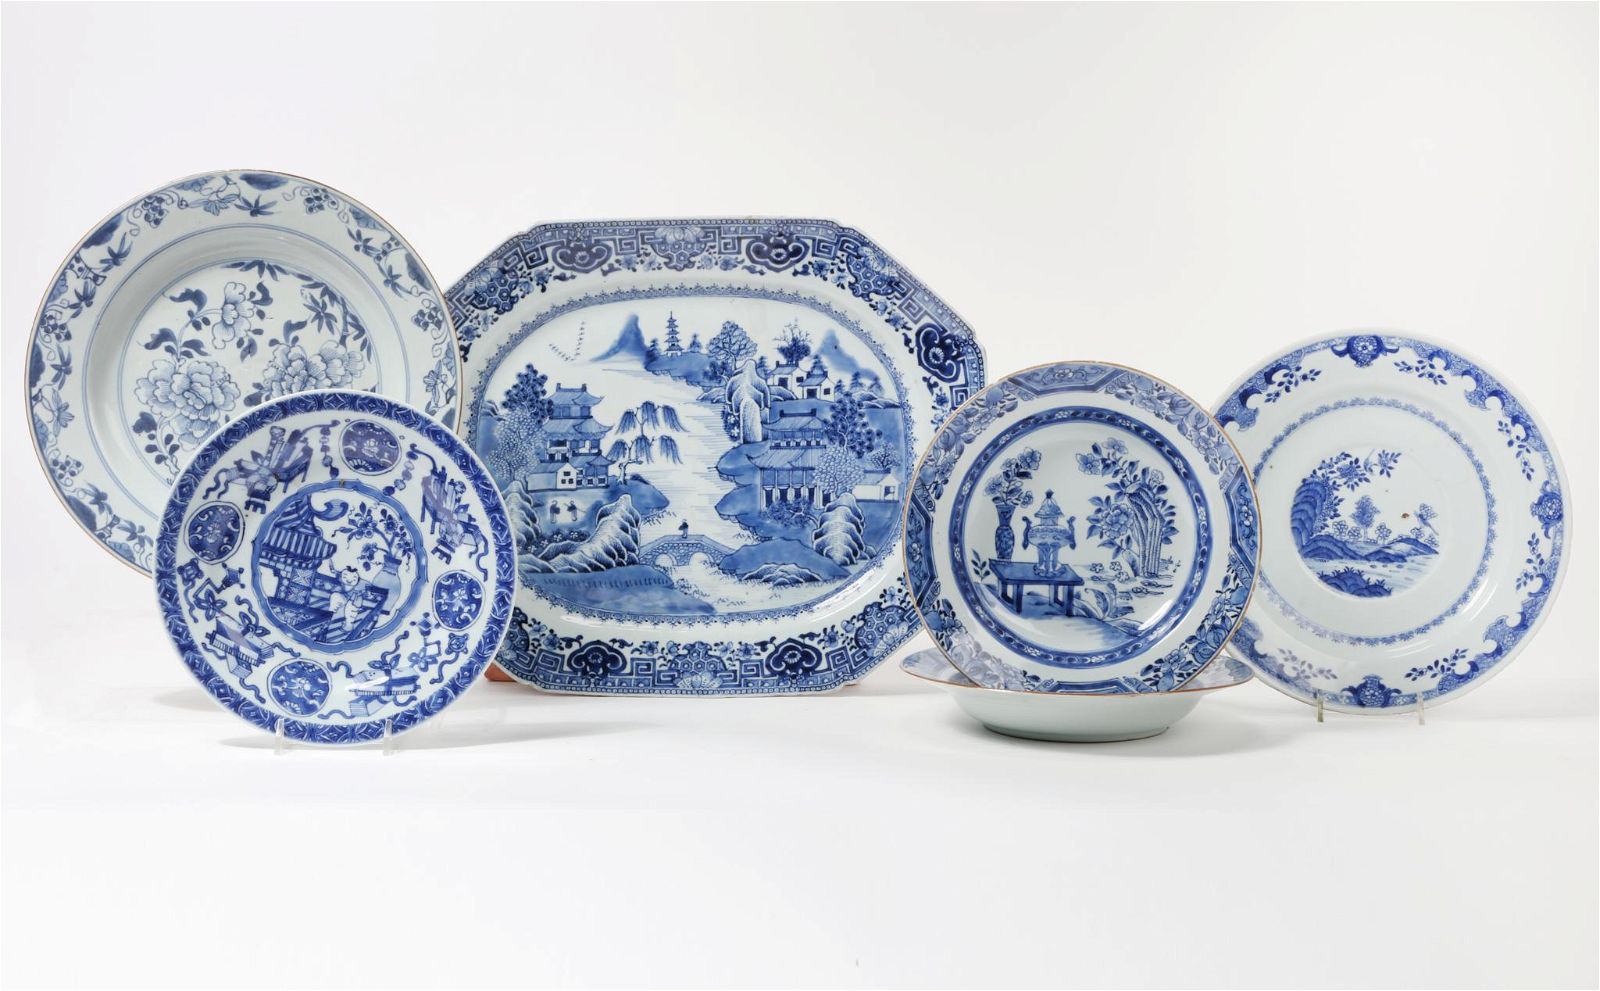 6 CHINESE EXPORT BLUE & WHITE PORCELAINSSix